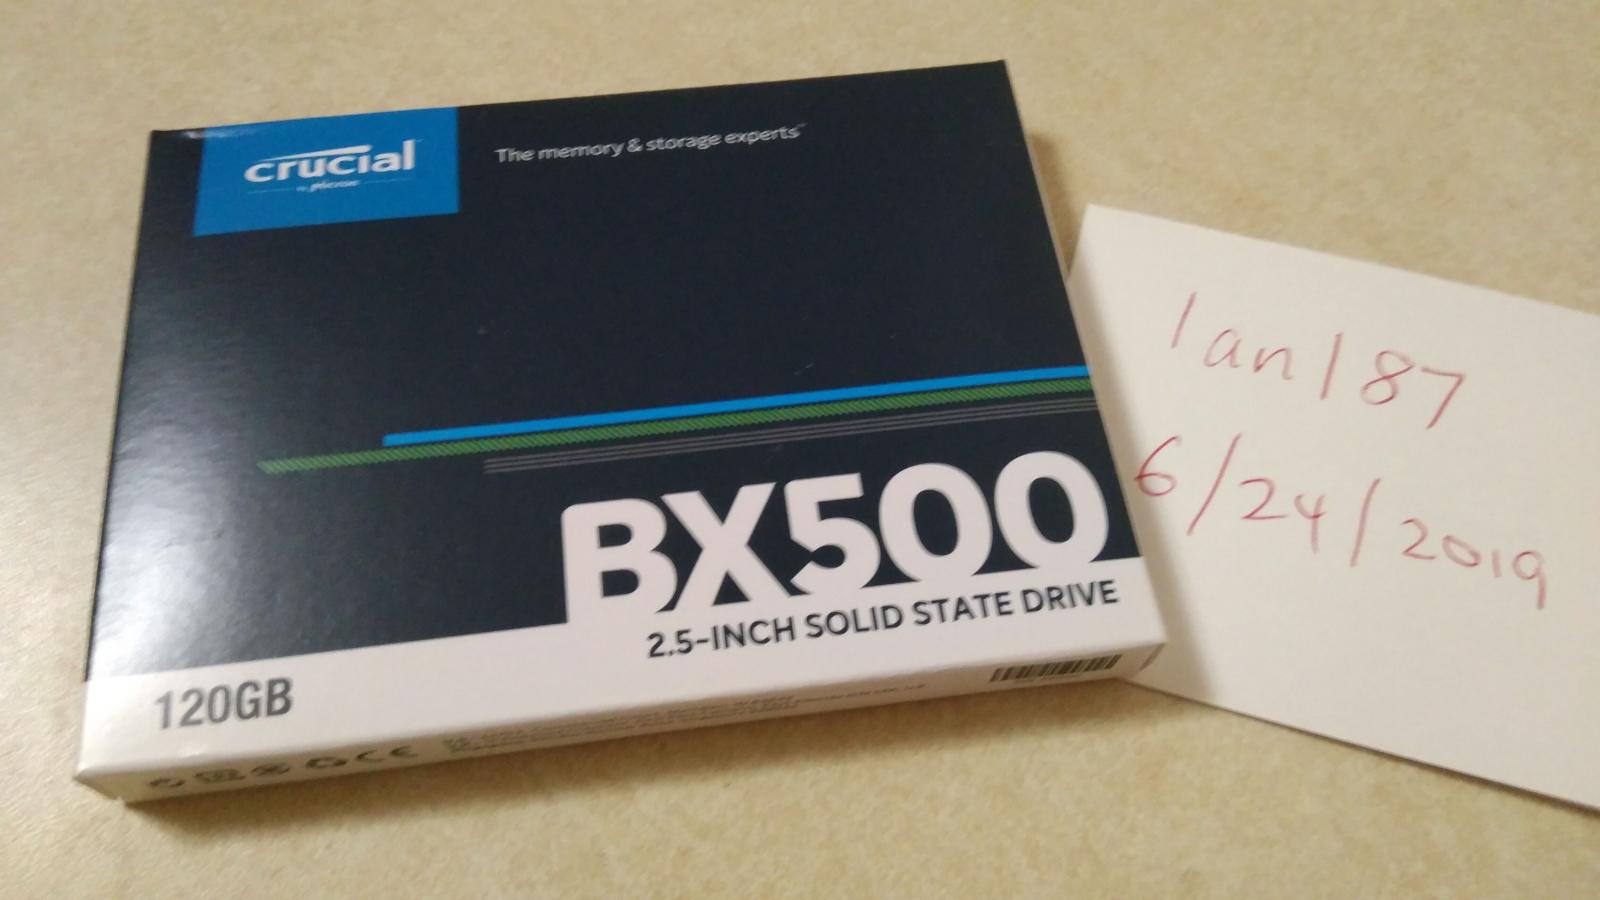 For sale Crucial BX500 2.5